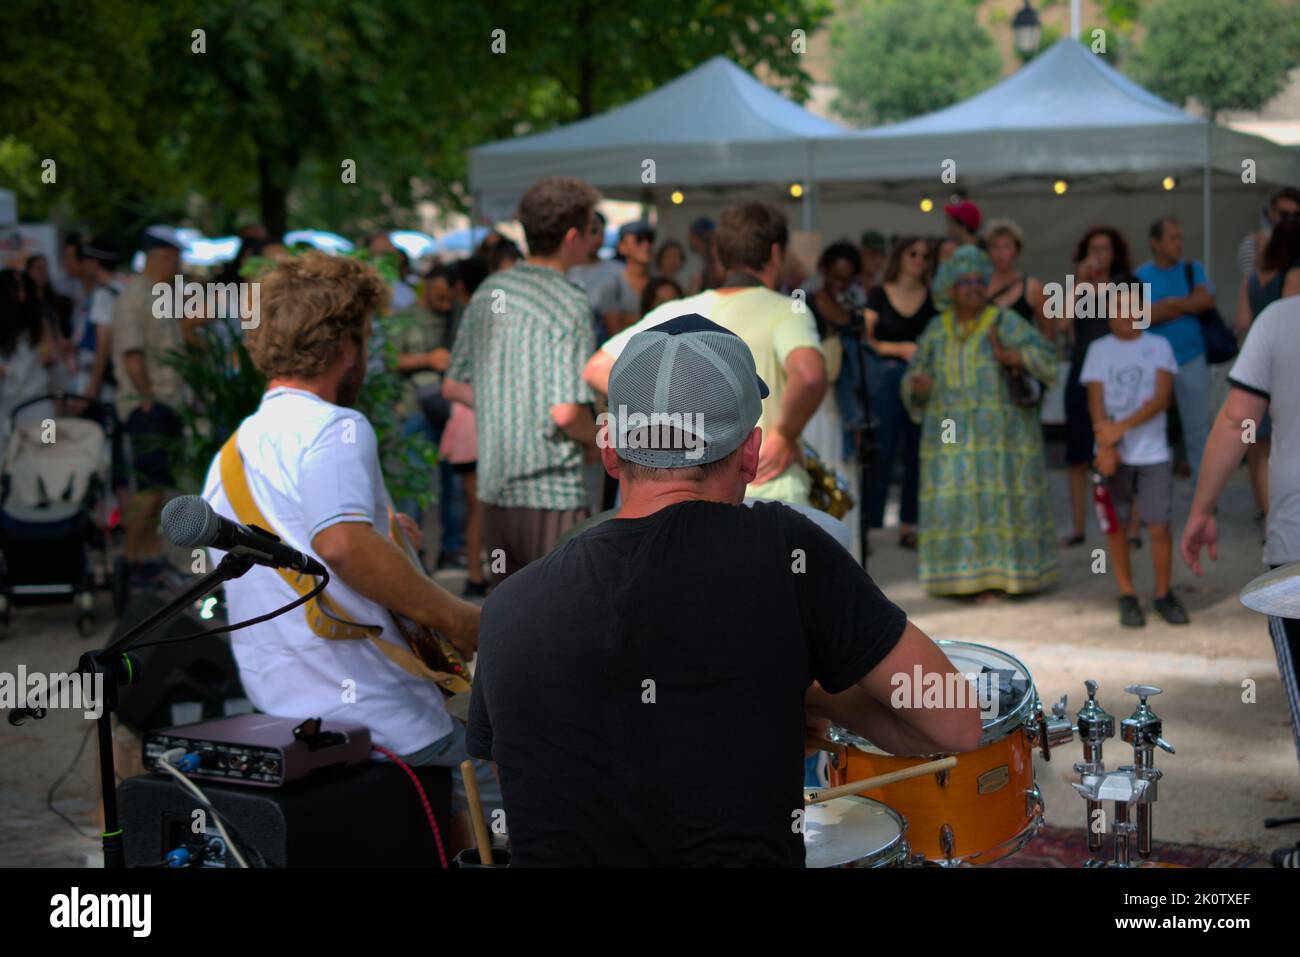 Drummer of a jazz band performing at a local festival in a park, Geneva Switzerland Stock Photo